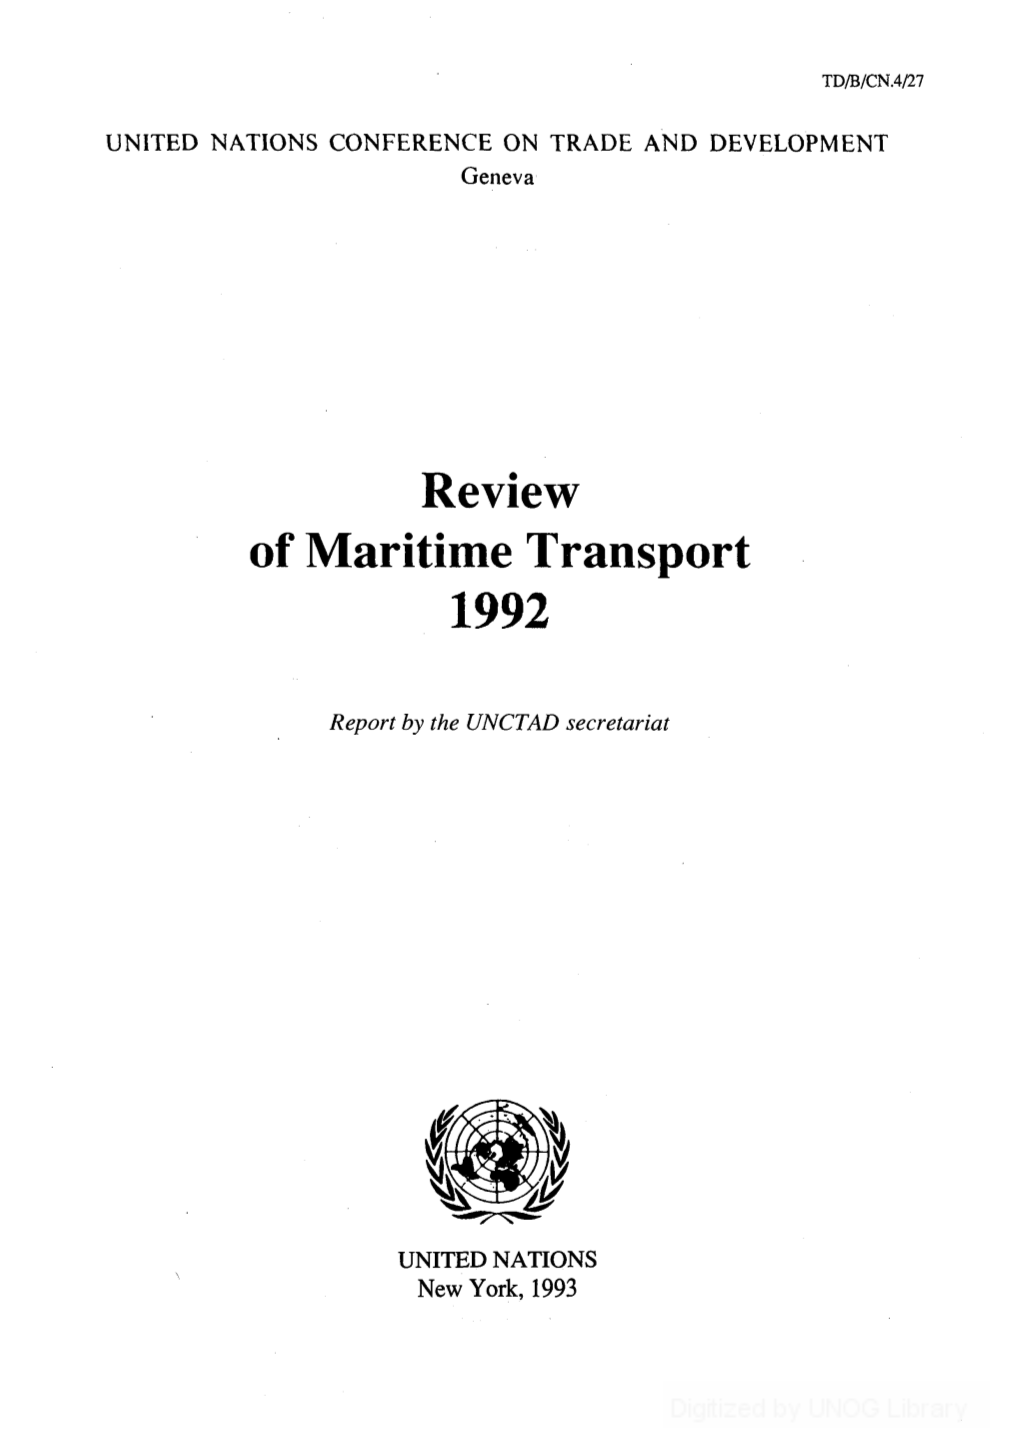 Review of Maritime Transport 1992